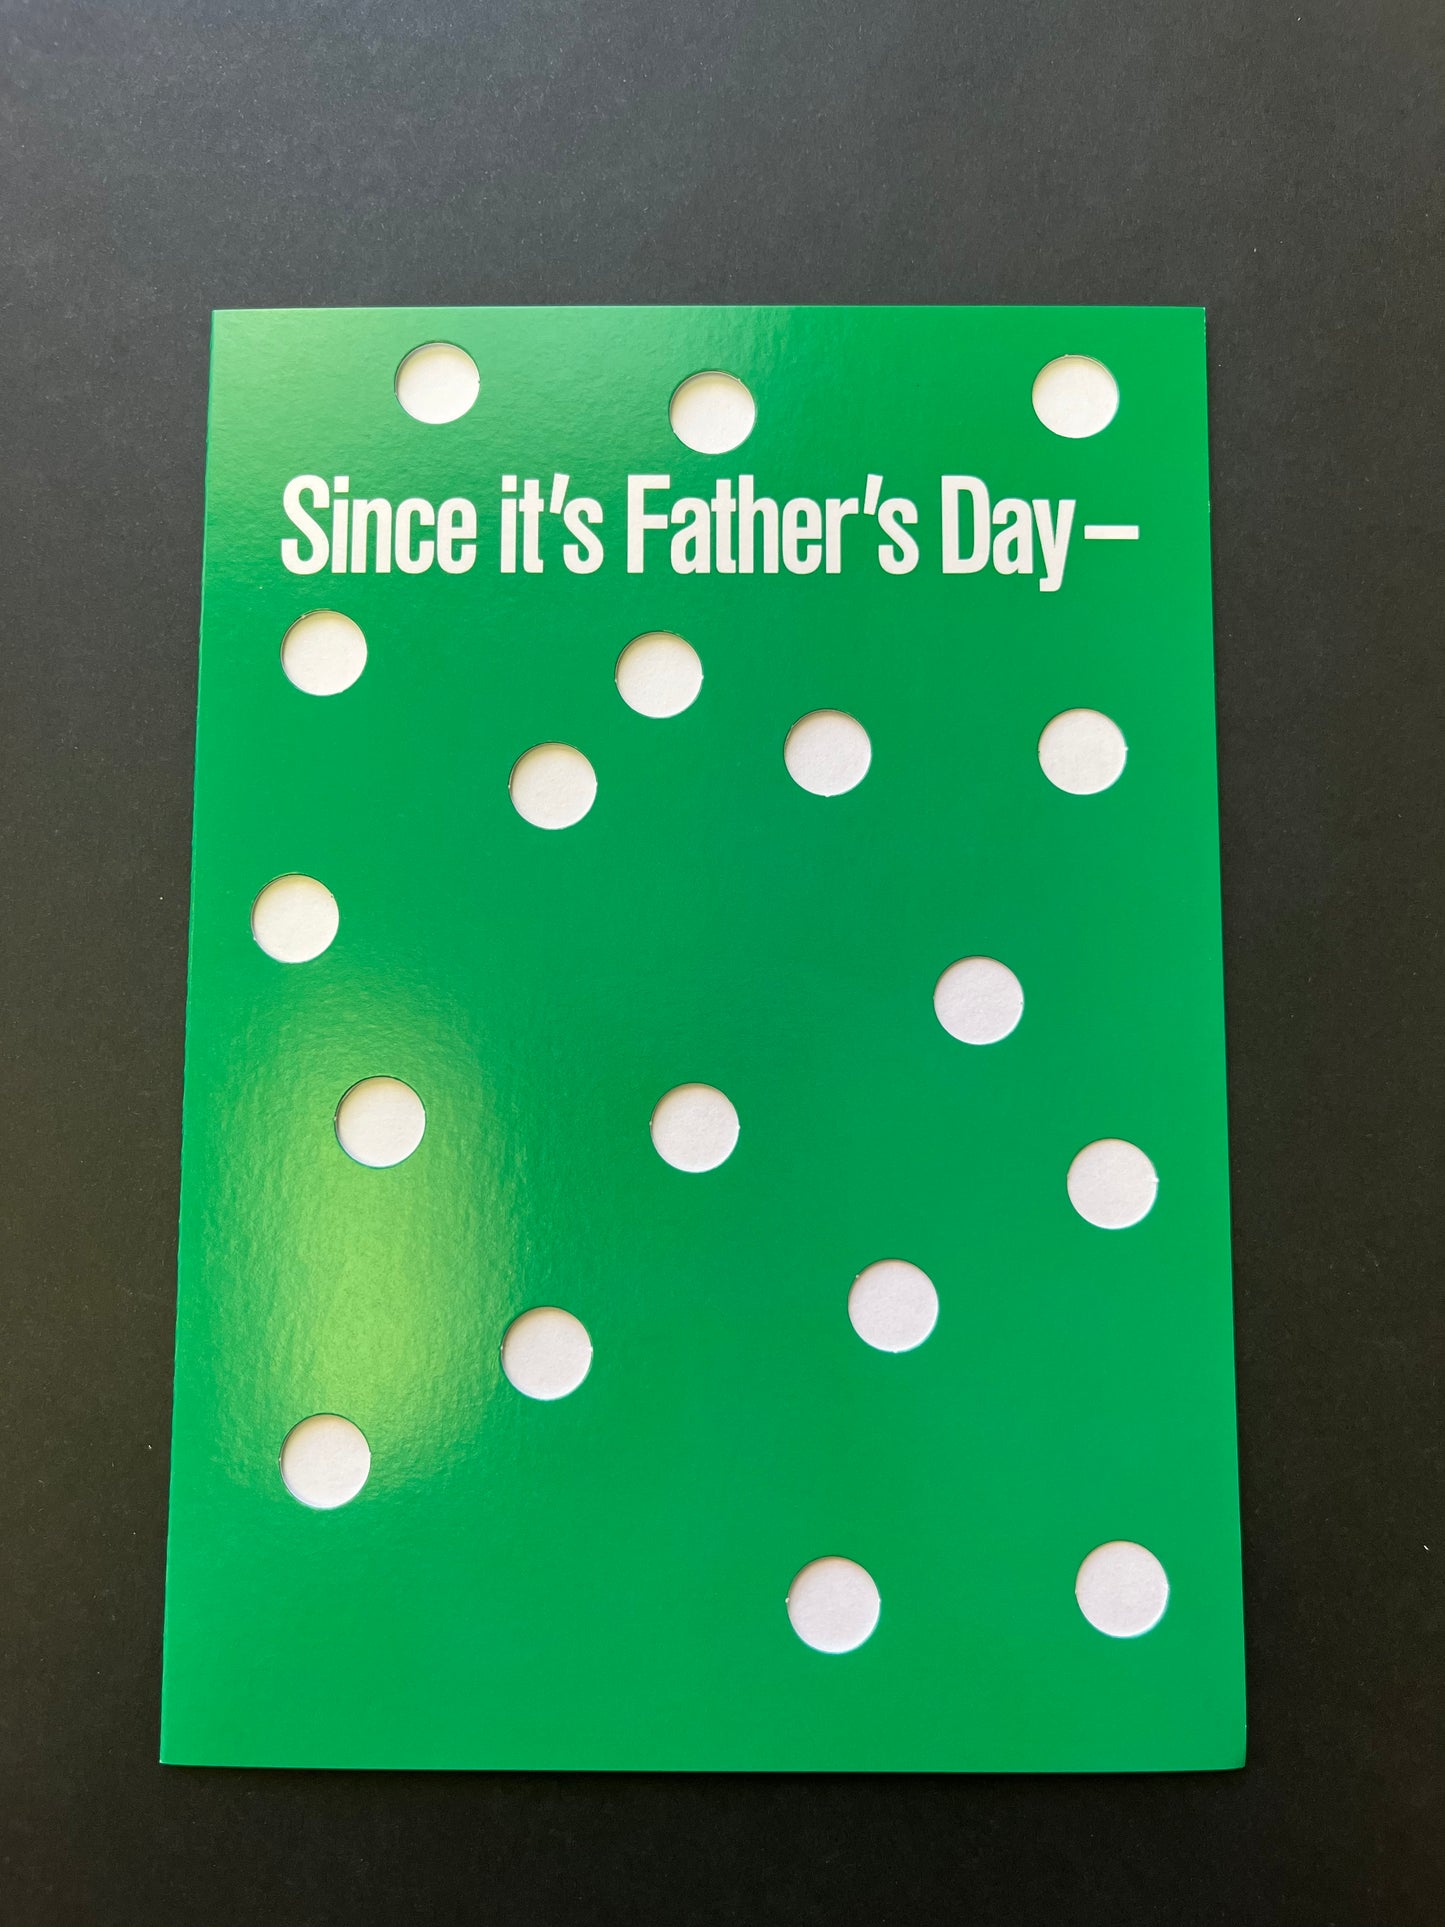 18 Holes - Father's Day Card